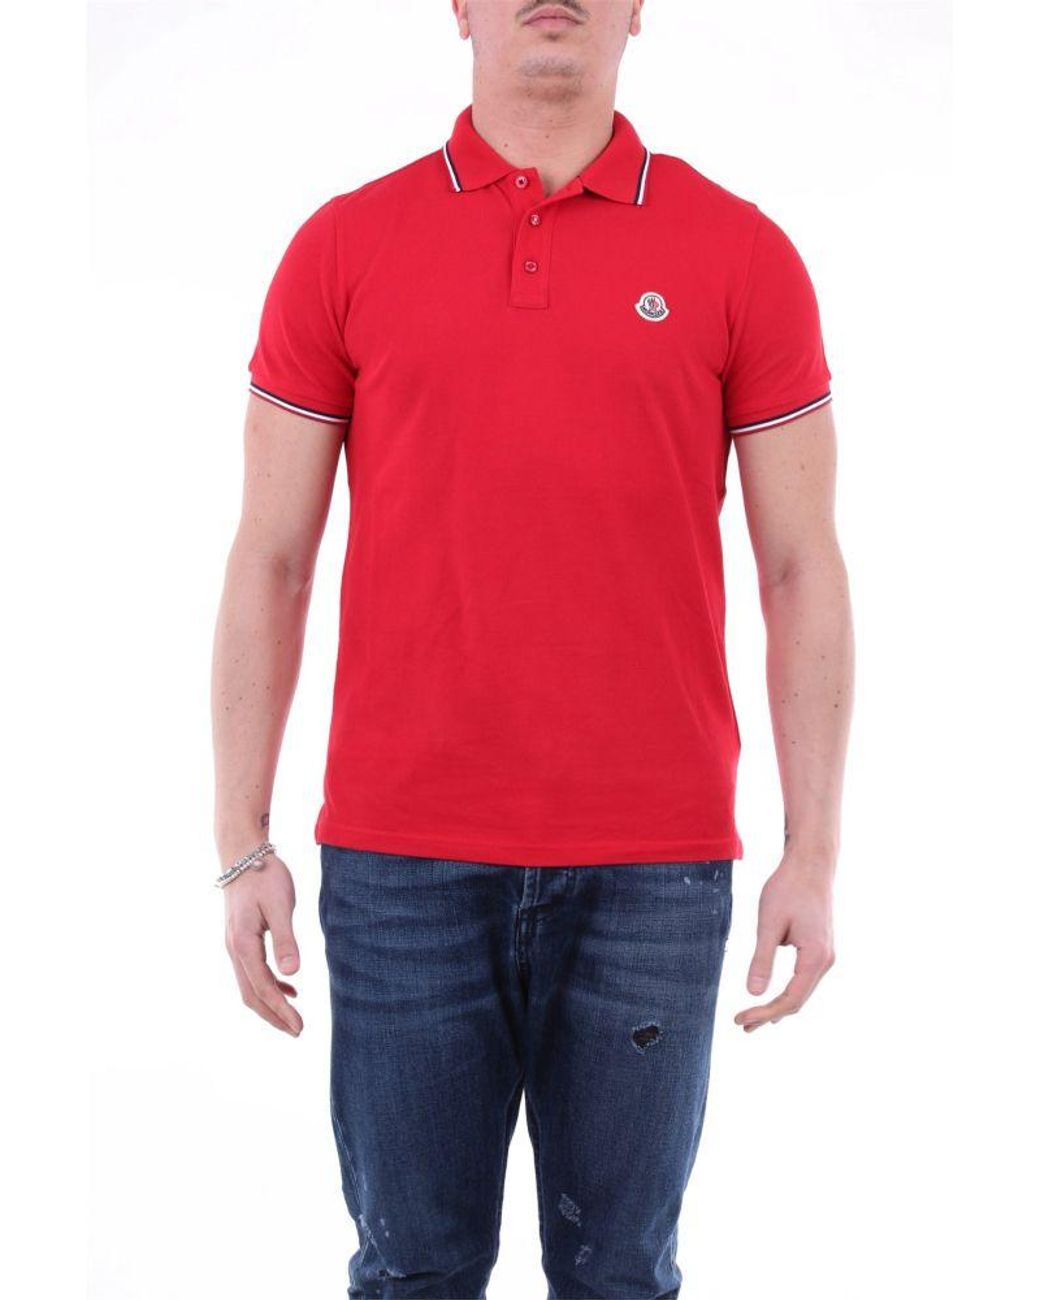 Moncler Cotton T-shirt in Red for Men - Lyst